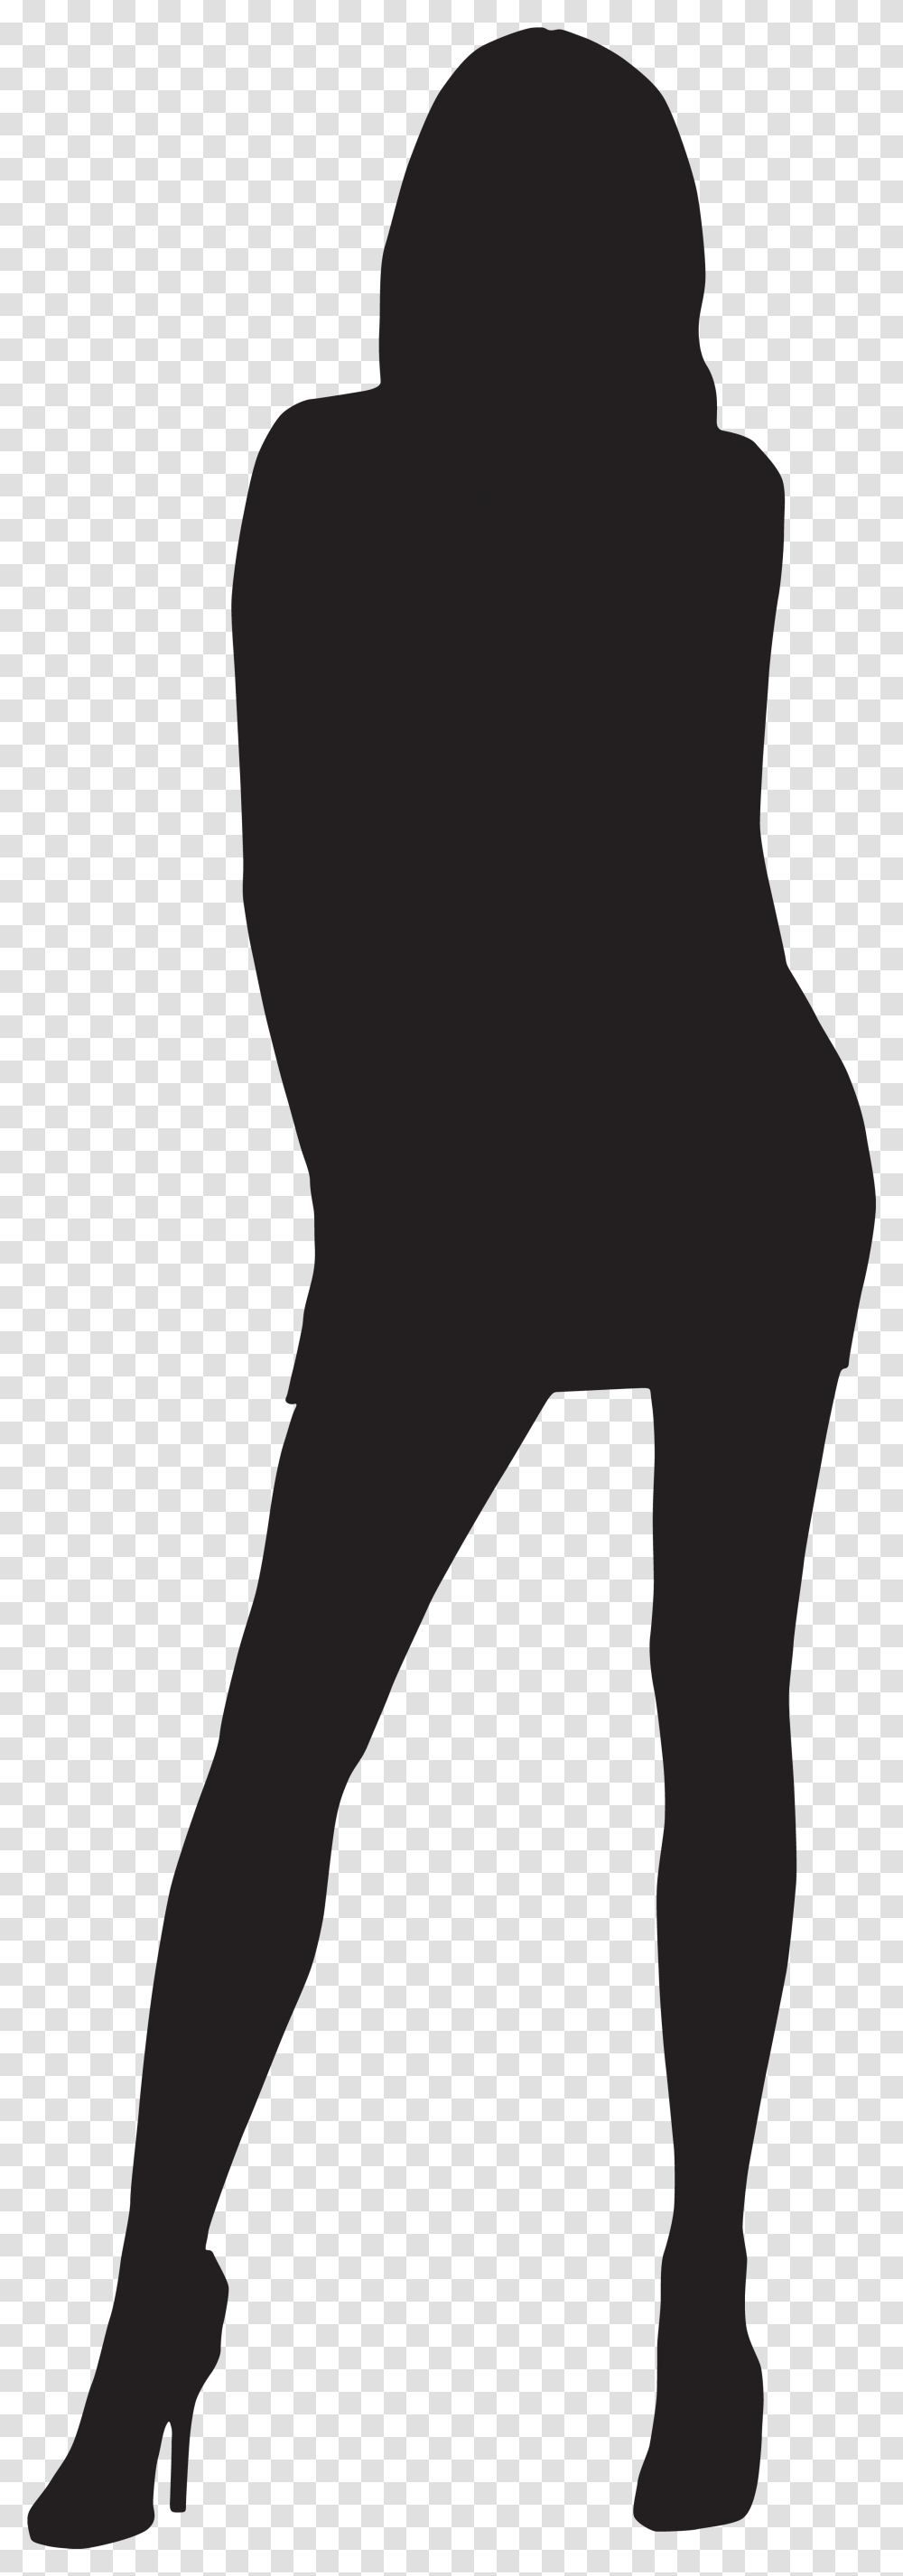 Raster Graphics Lossless Compression Computer File Silhouette Of Woman At Gallery, Person, Human, Standing, Mammal Transparent Png